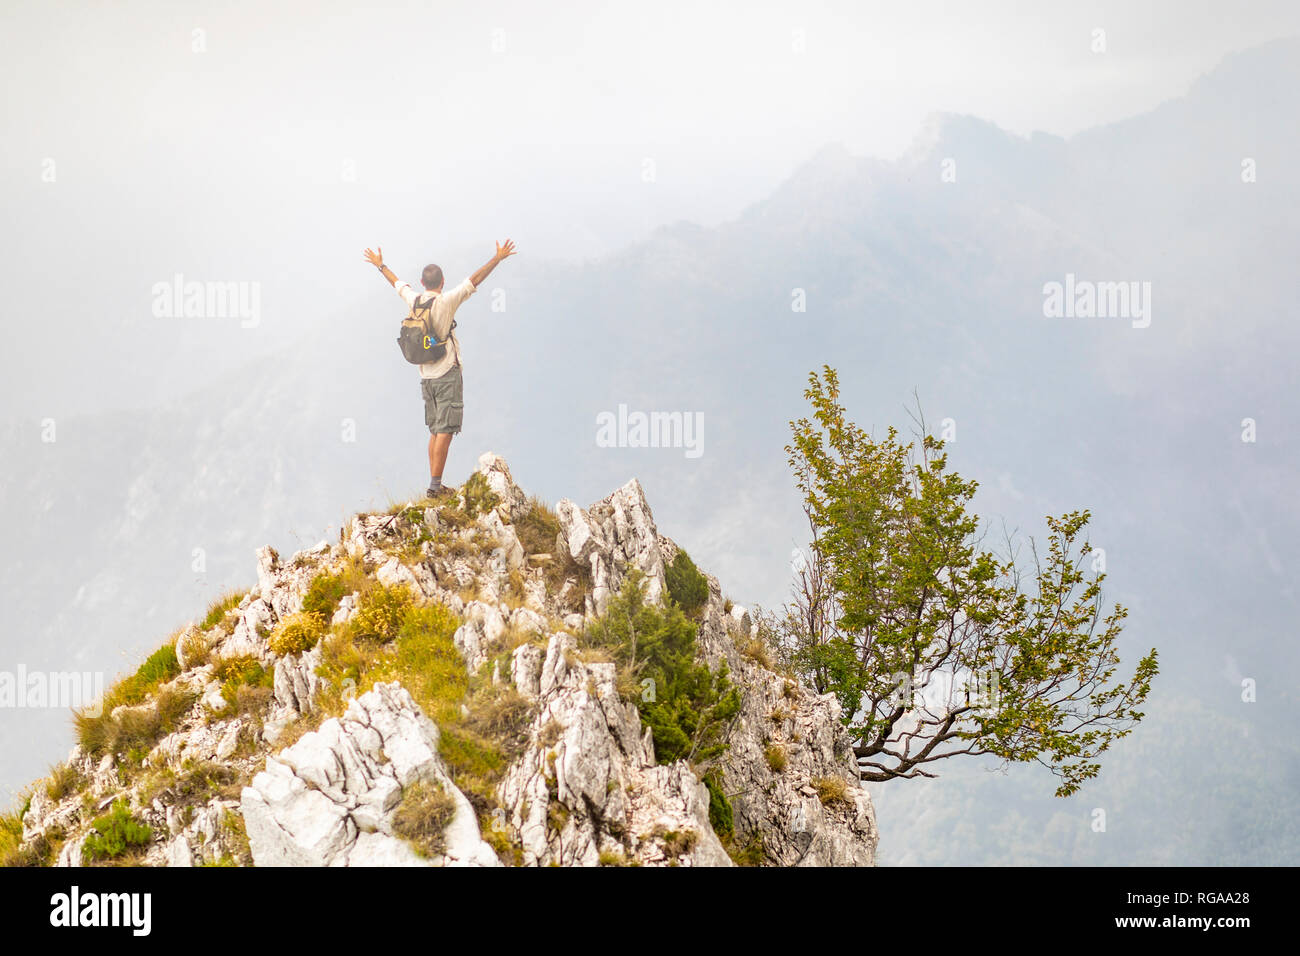 Italy, Massa, man cheering on top of a peak in the Alpi Apuane mountains Stock Photo